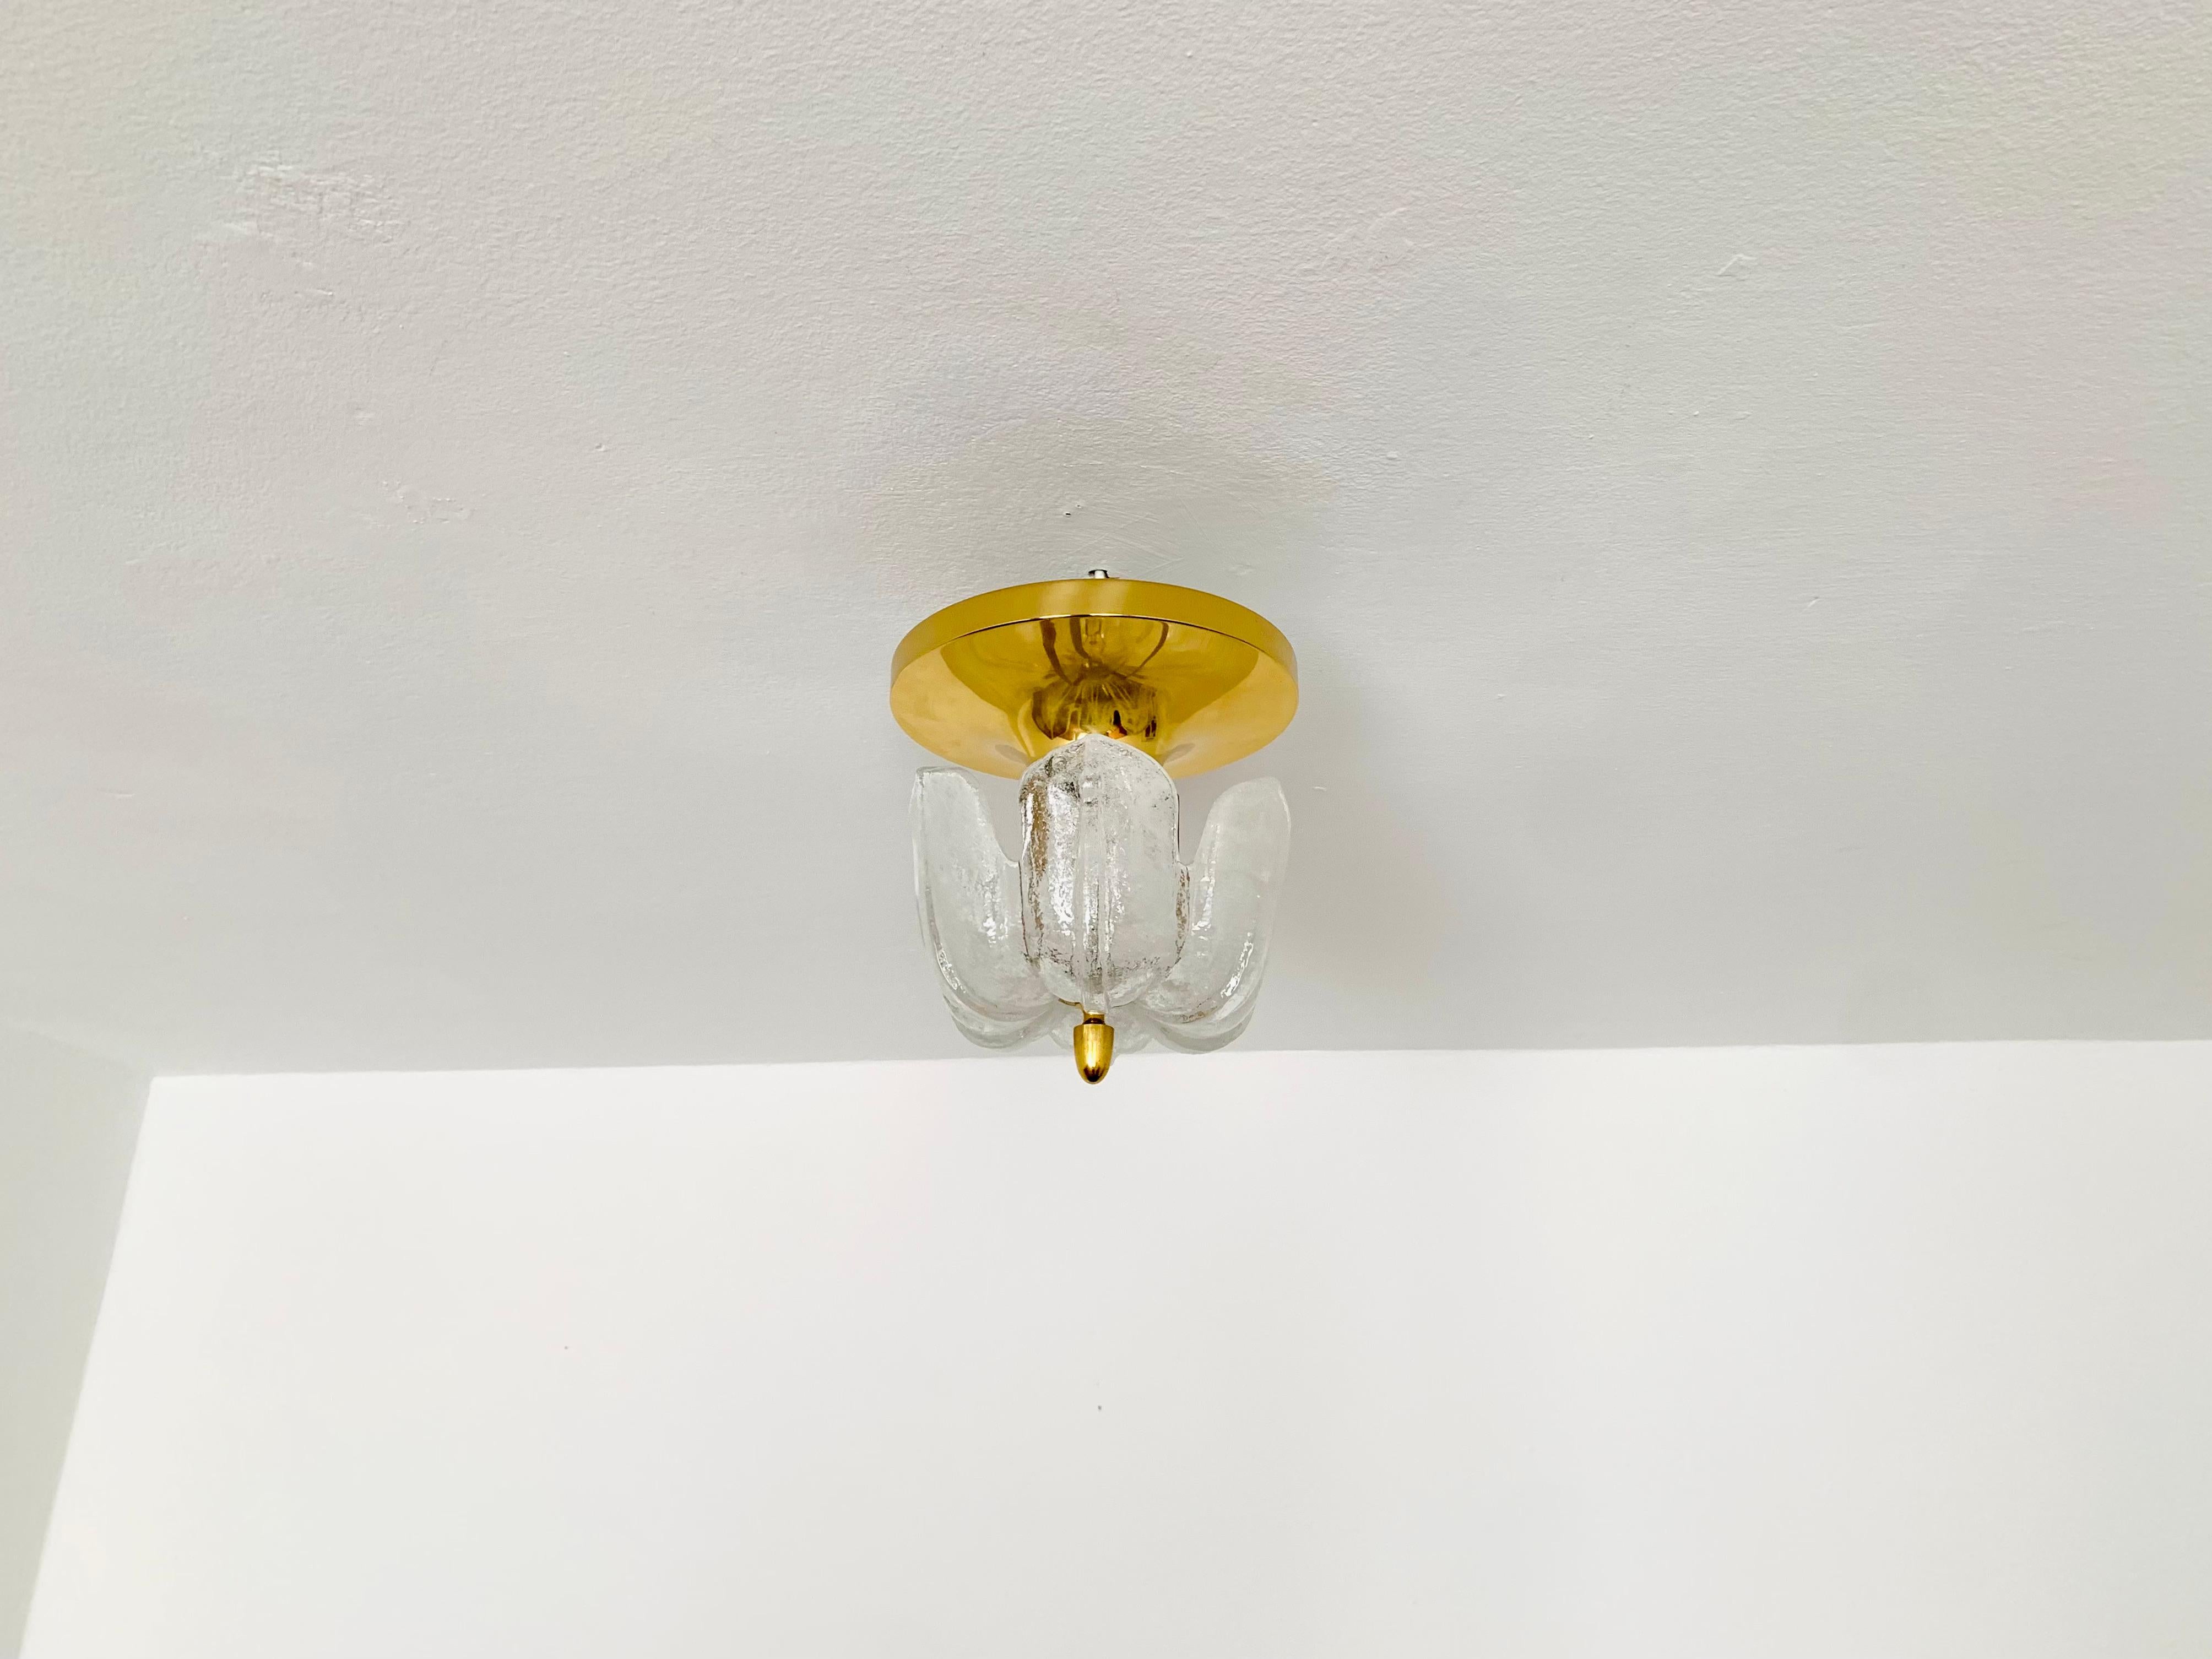 Very nice ceiling lamp from the Glashütte Limburg.
The lamp spreads a great play of light in the room and enchants through its charisma.
Wonderful design and very high -quality workmanship.

Manufacturer: Glashütte Limburg

Condition:

Very good